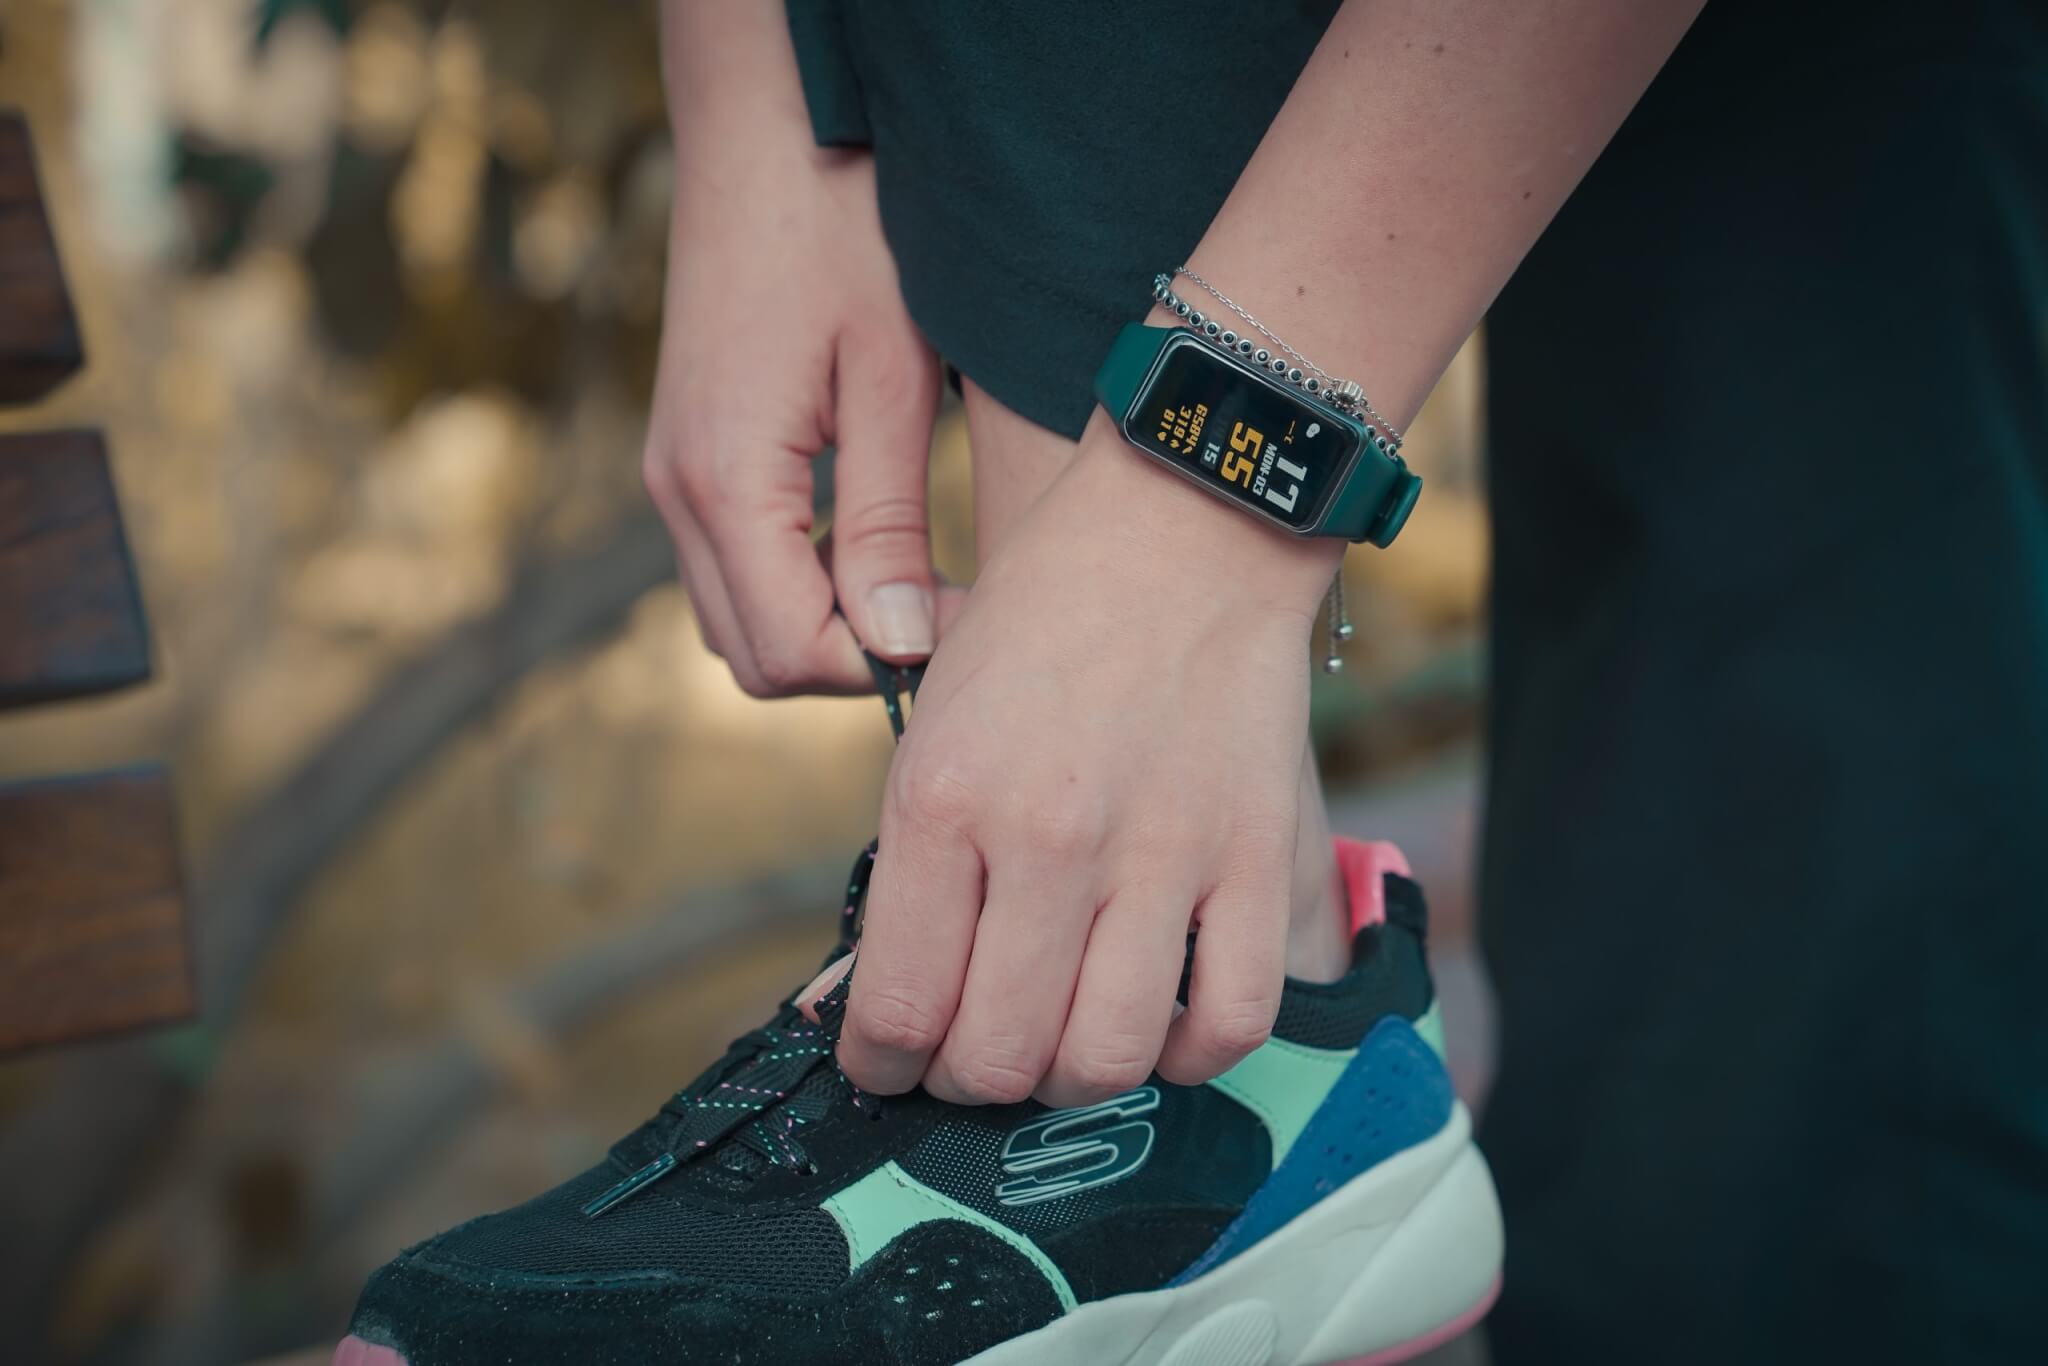 Those most at risk of heart disease use wearable fitness trackers the least